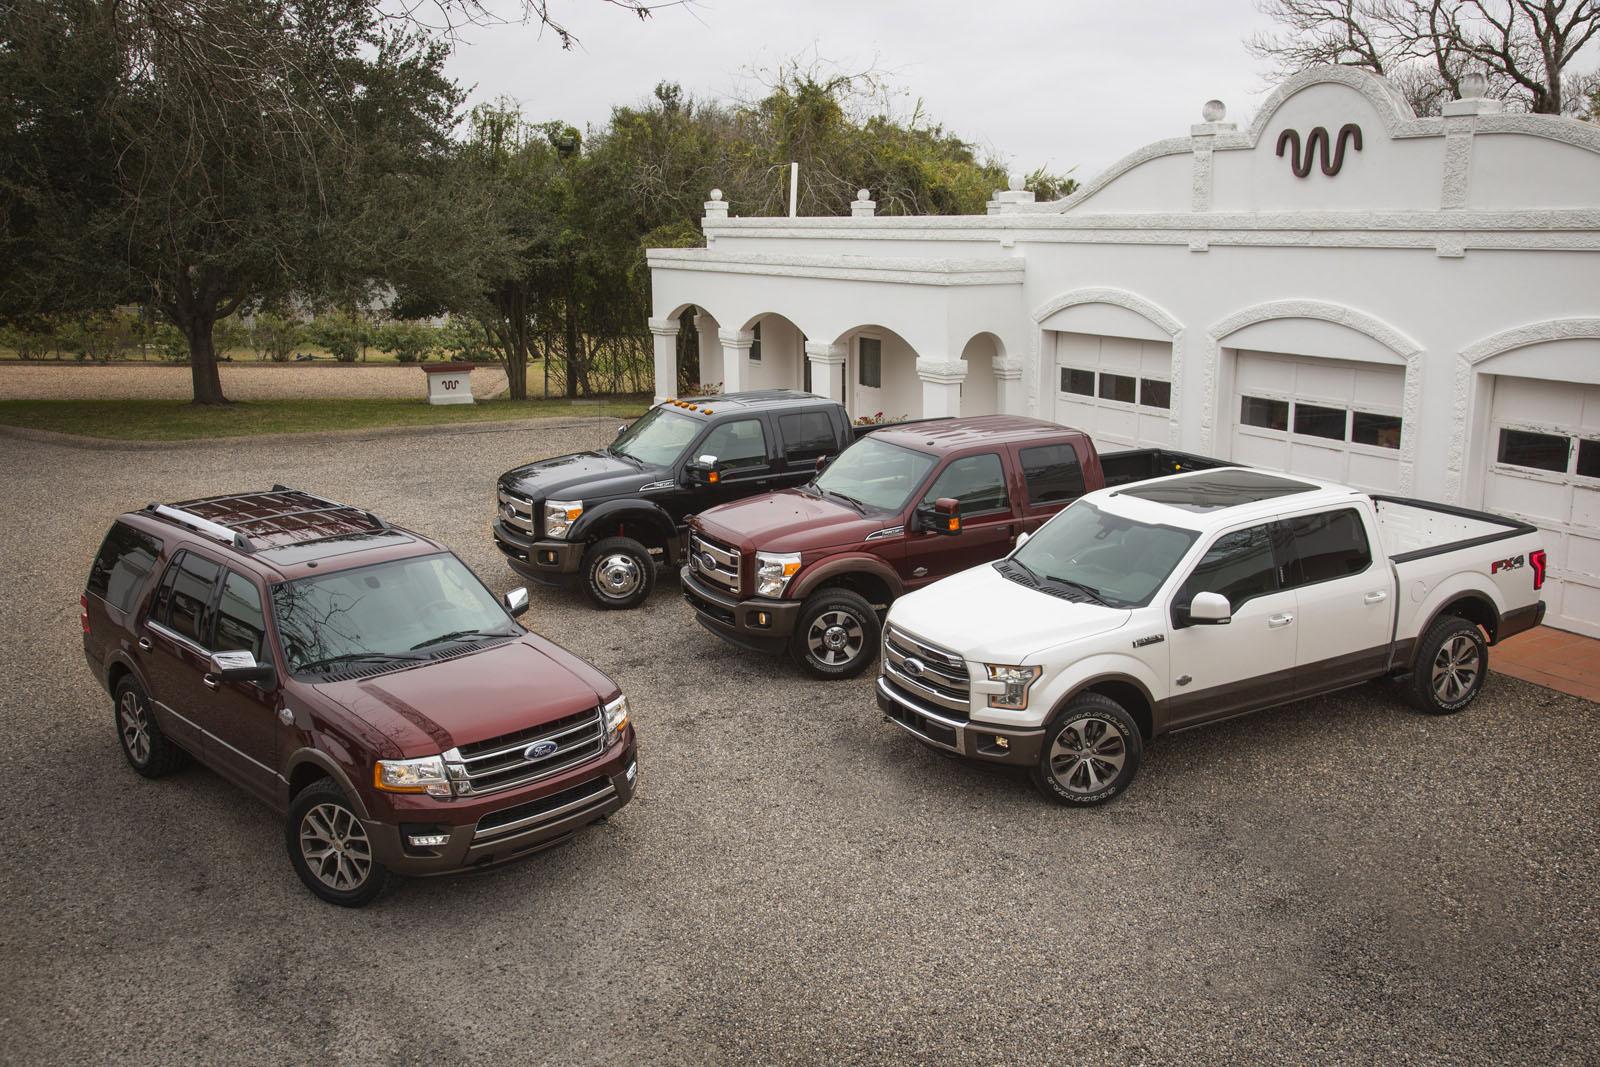 Ford King Ranch Lineup